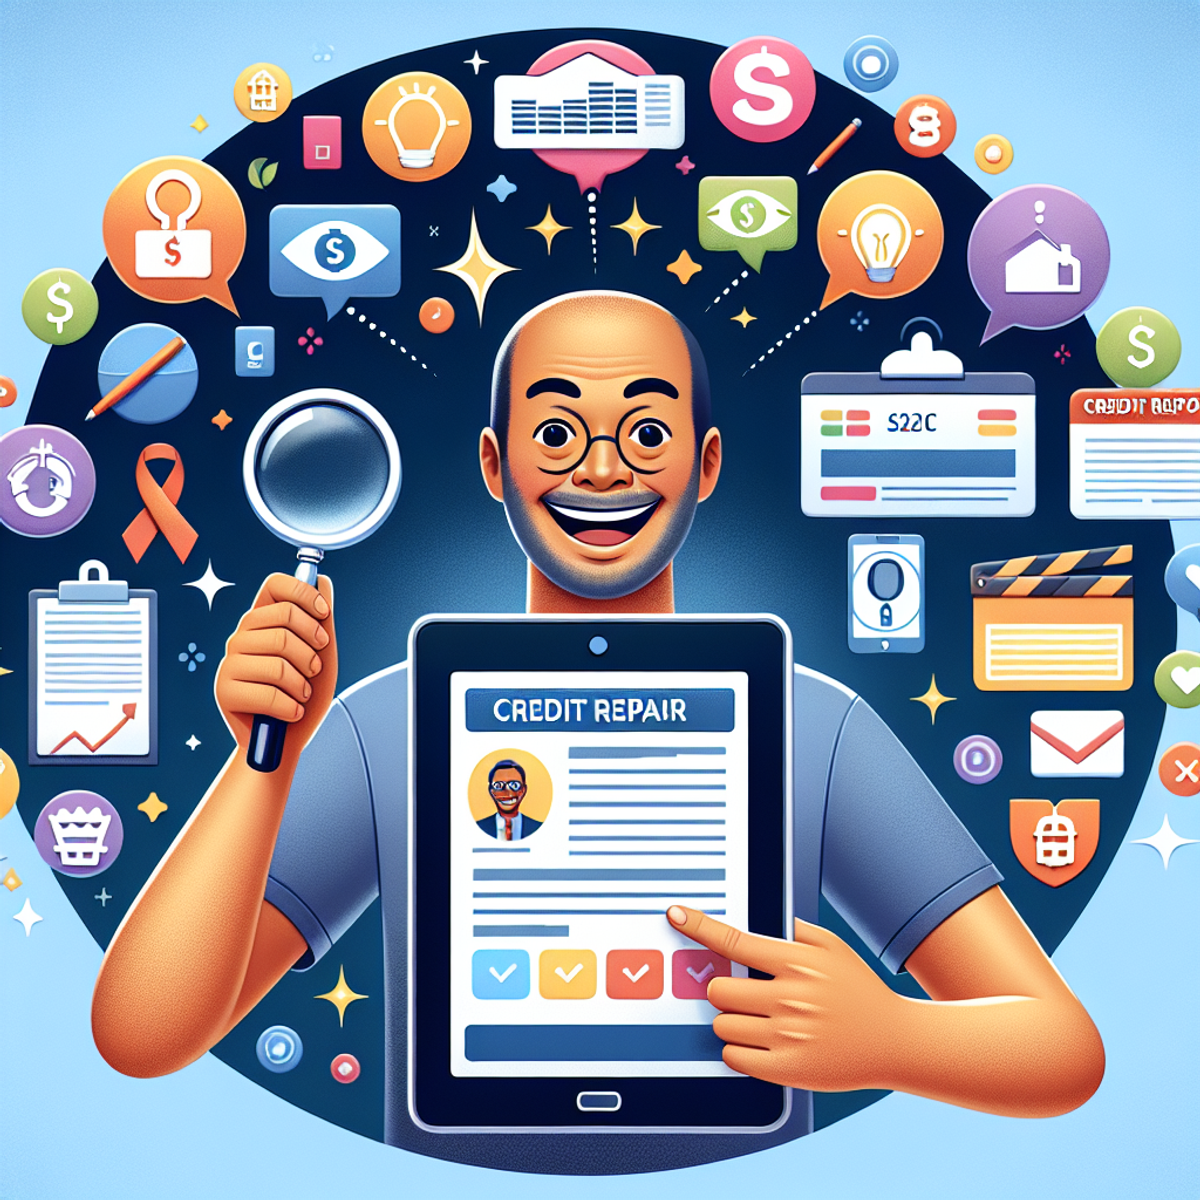 A person of South Asian descent smiles confidently as they hold a magnifying glass in one hand and a tablet in the other. The tablet's screen displays symbols representing a credit report, while vibrant icons surrounding them symbolize credit repair services.